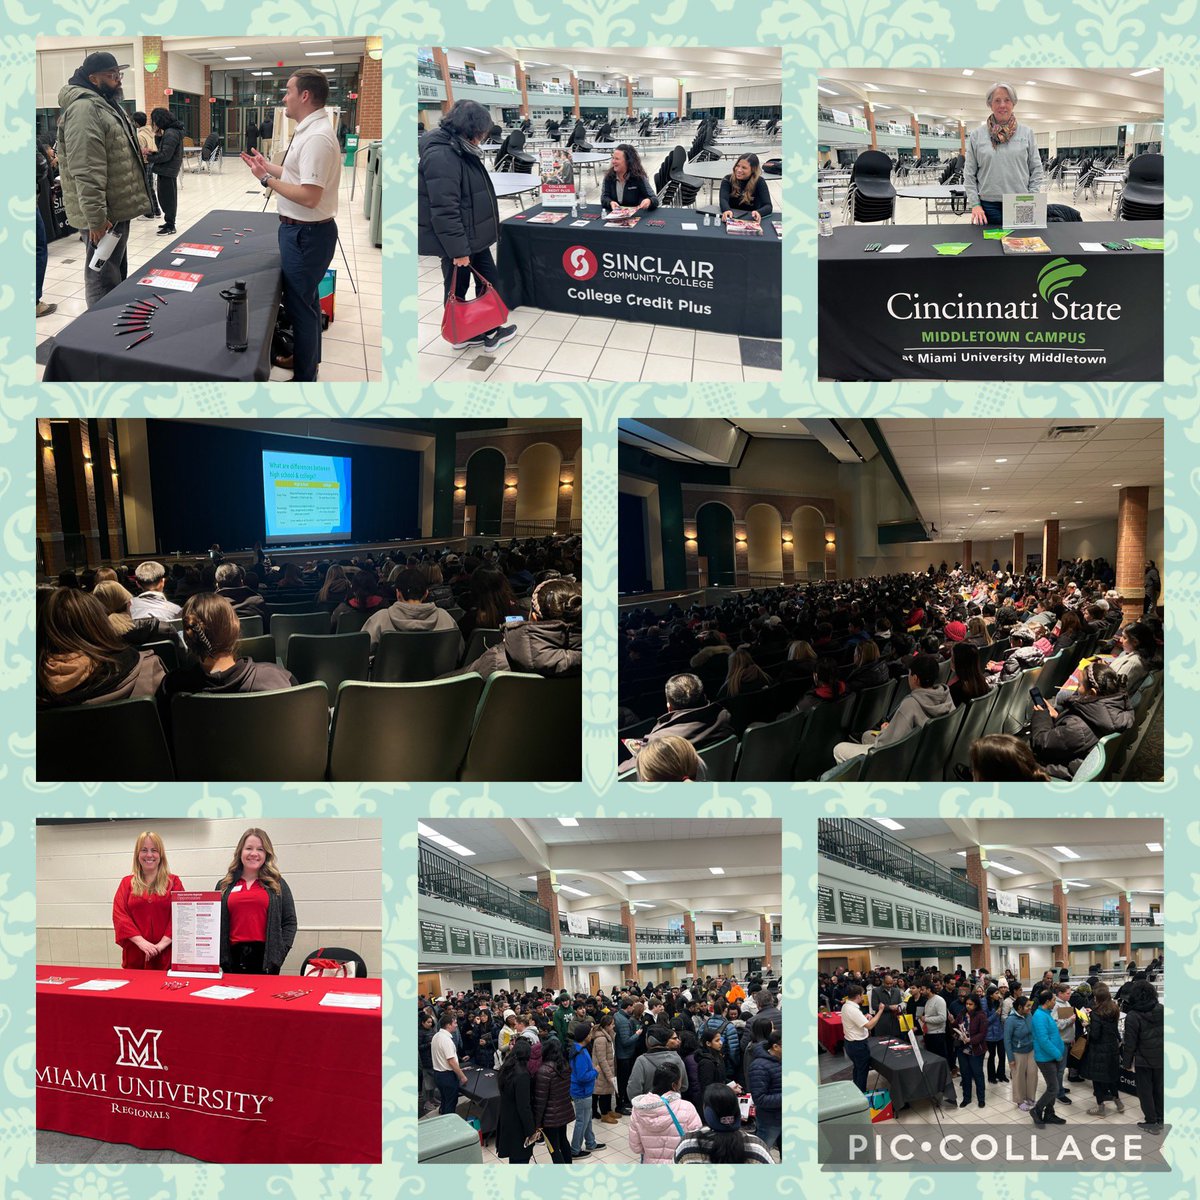 We had a strong showing in Comet Country at our College Credit Plus meeting. Our counseling team did a great job sharing information with our students & families! Thank you @SinclairCC @uofcincy @CinStateCollege @miamiuniversity for joining us.
#parentinvolvement #support